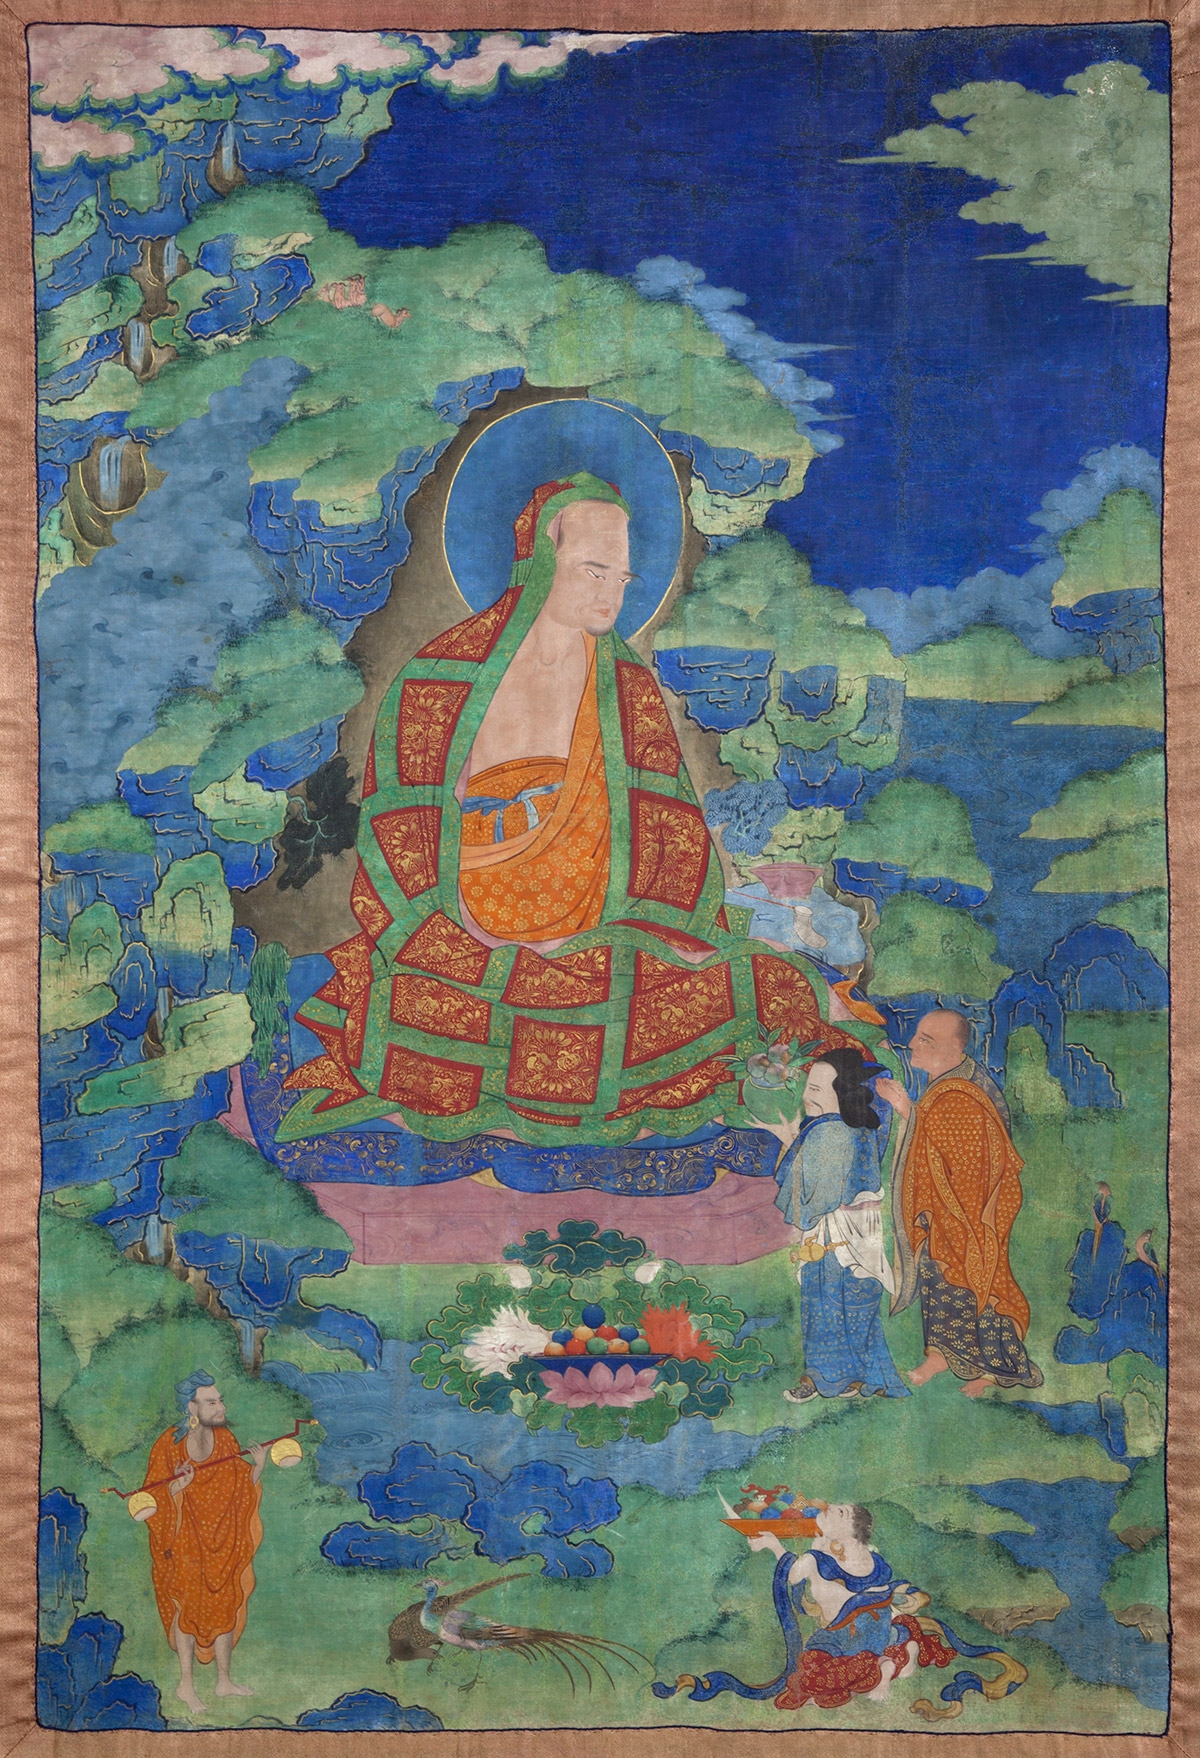 Ajita Arhat. 17th century. Possibly Kham (East Tibet). Tradition: Gelug. Pigments on cloth. MU-CIV/MAO "Giuseppe Tucci," inv. 923/756. Placement as indicated on verso: 2nd from right. Image courtesy of the Museum of Civilisation/Museum of Oriental Art "Giuseppe Tucci," Rome.